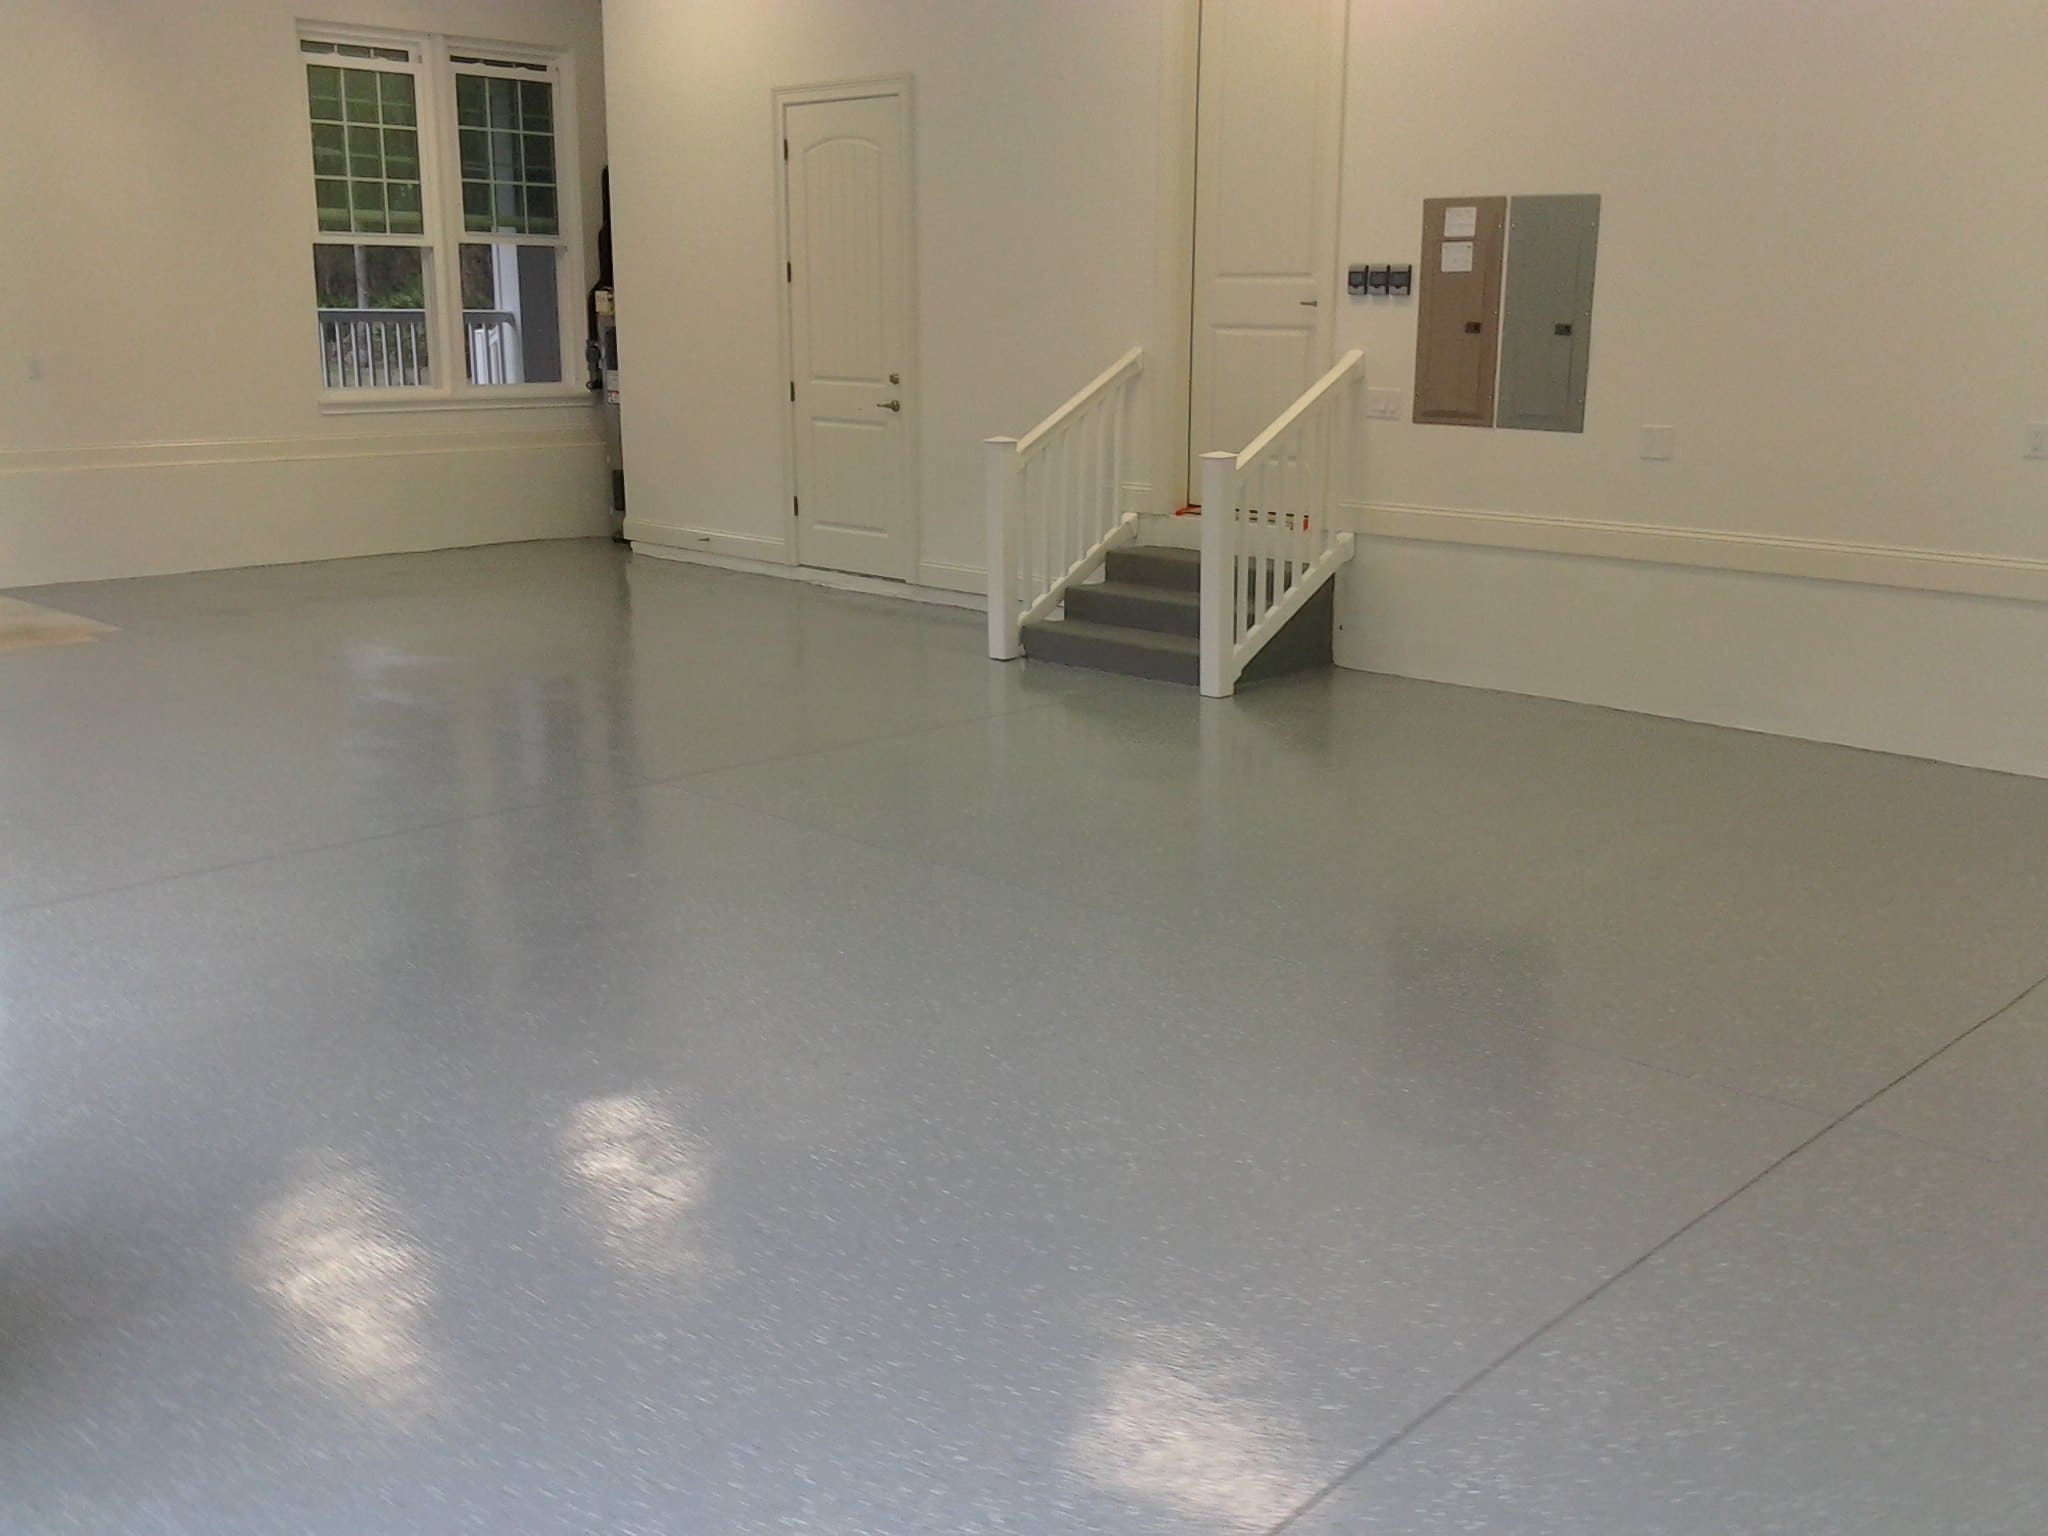 5 Reasons to consider Epoxy Flooring for Your Basement